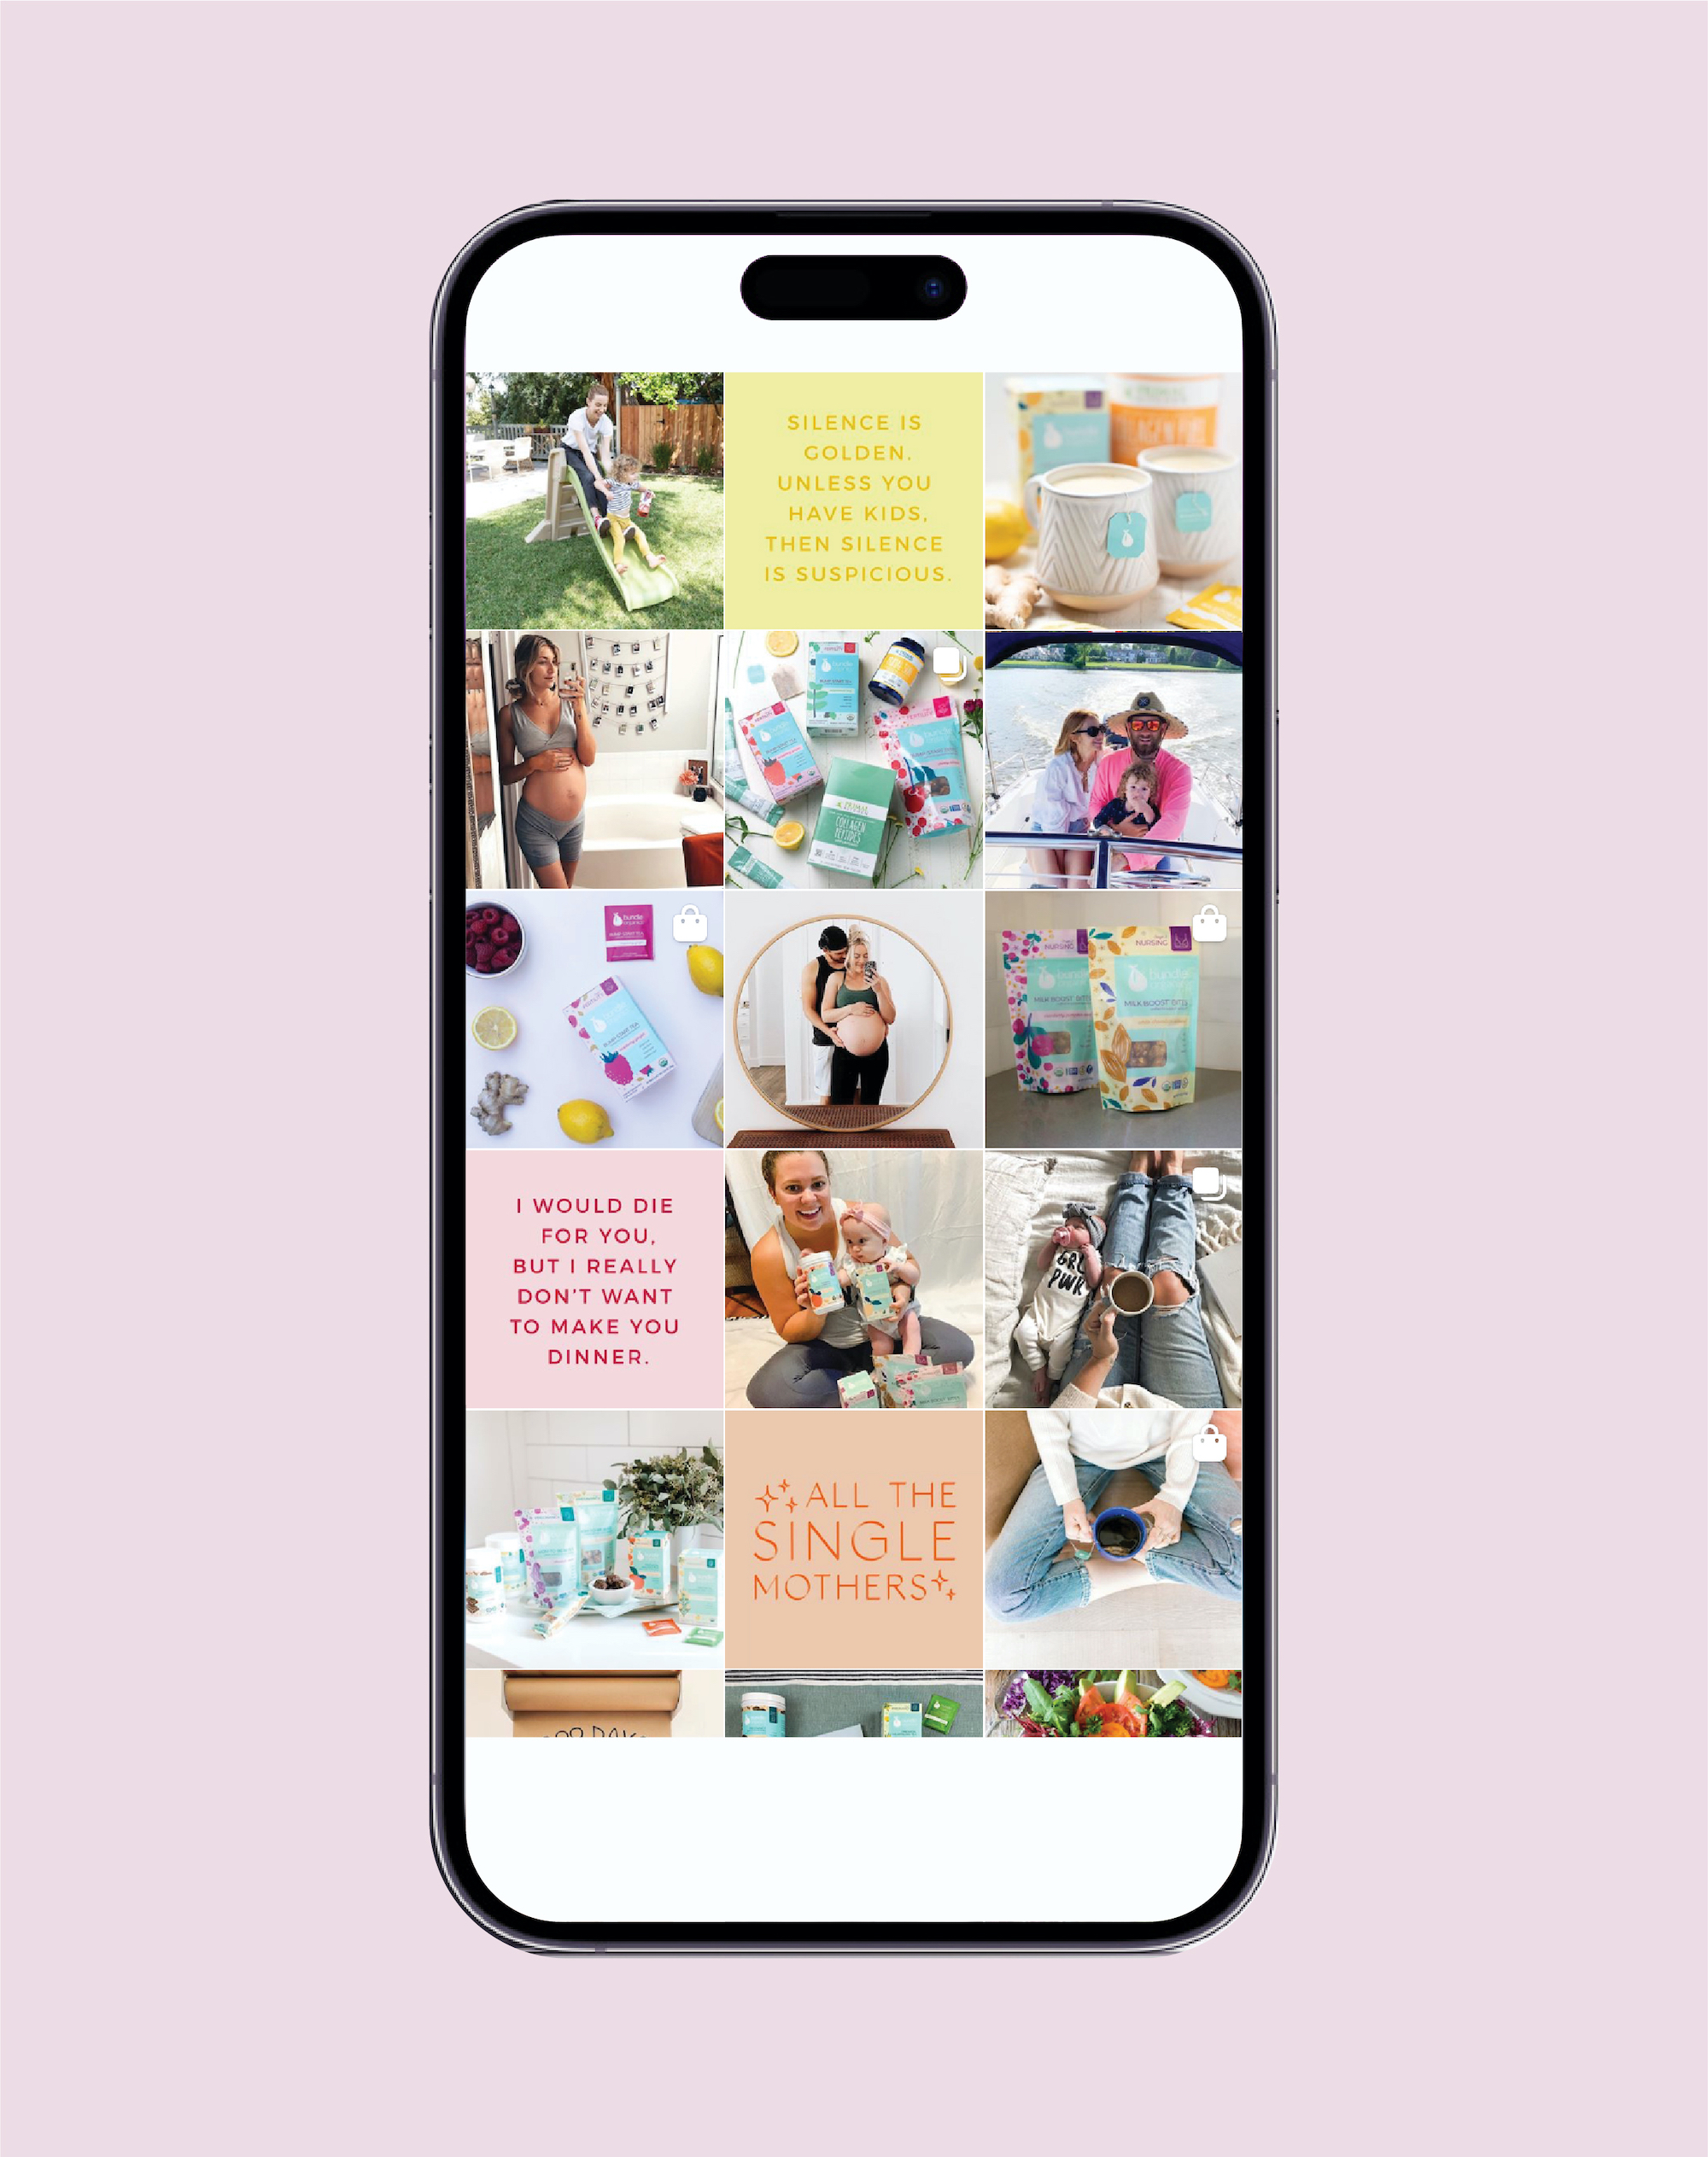 iPhone displaying a grid of social images representing motherhood, mom humor, and Bundle Organics products.